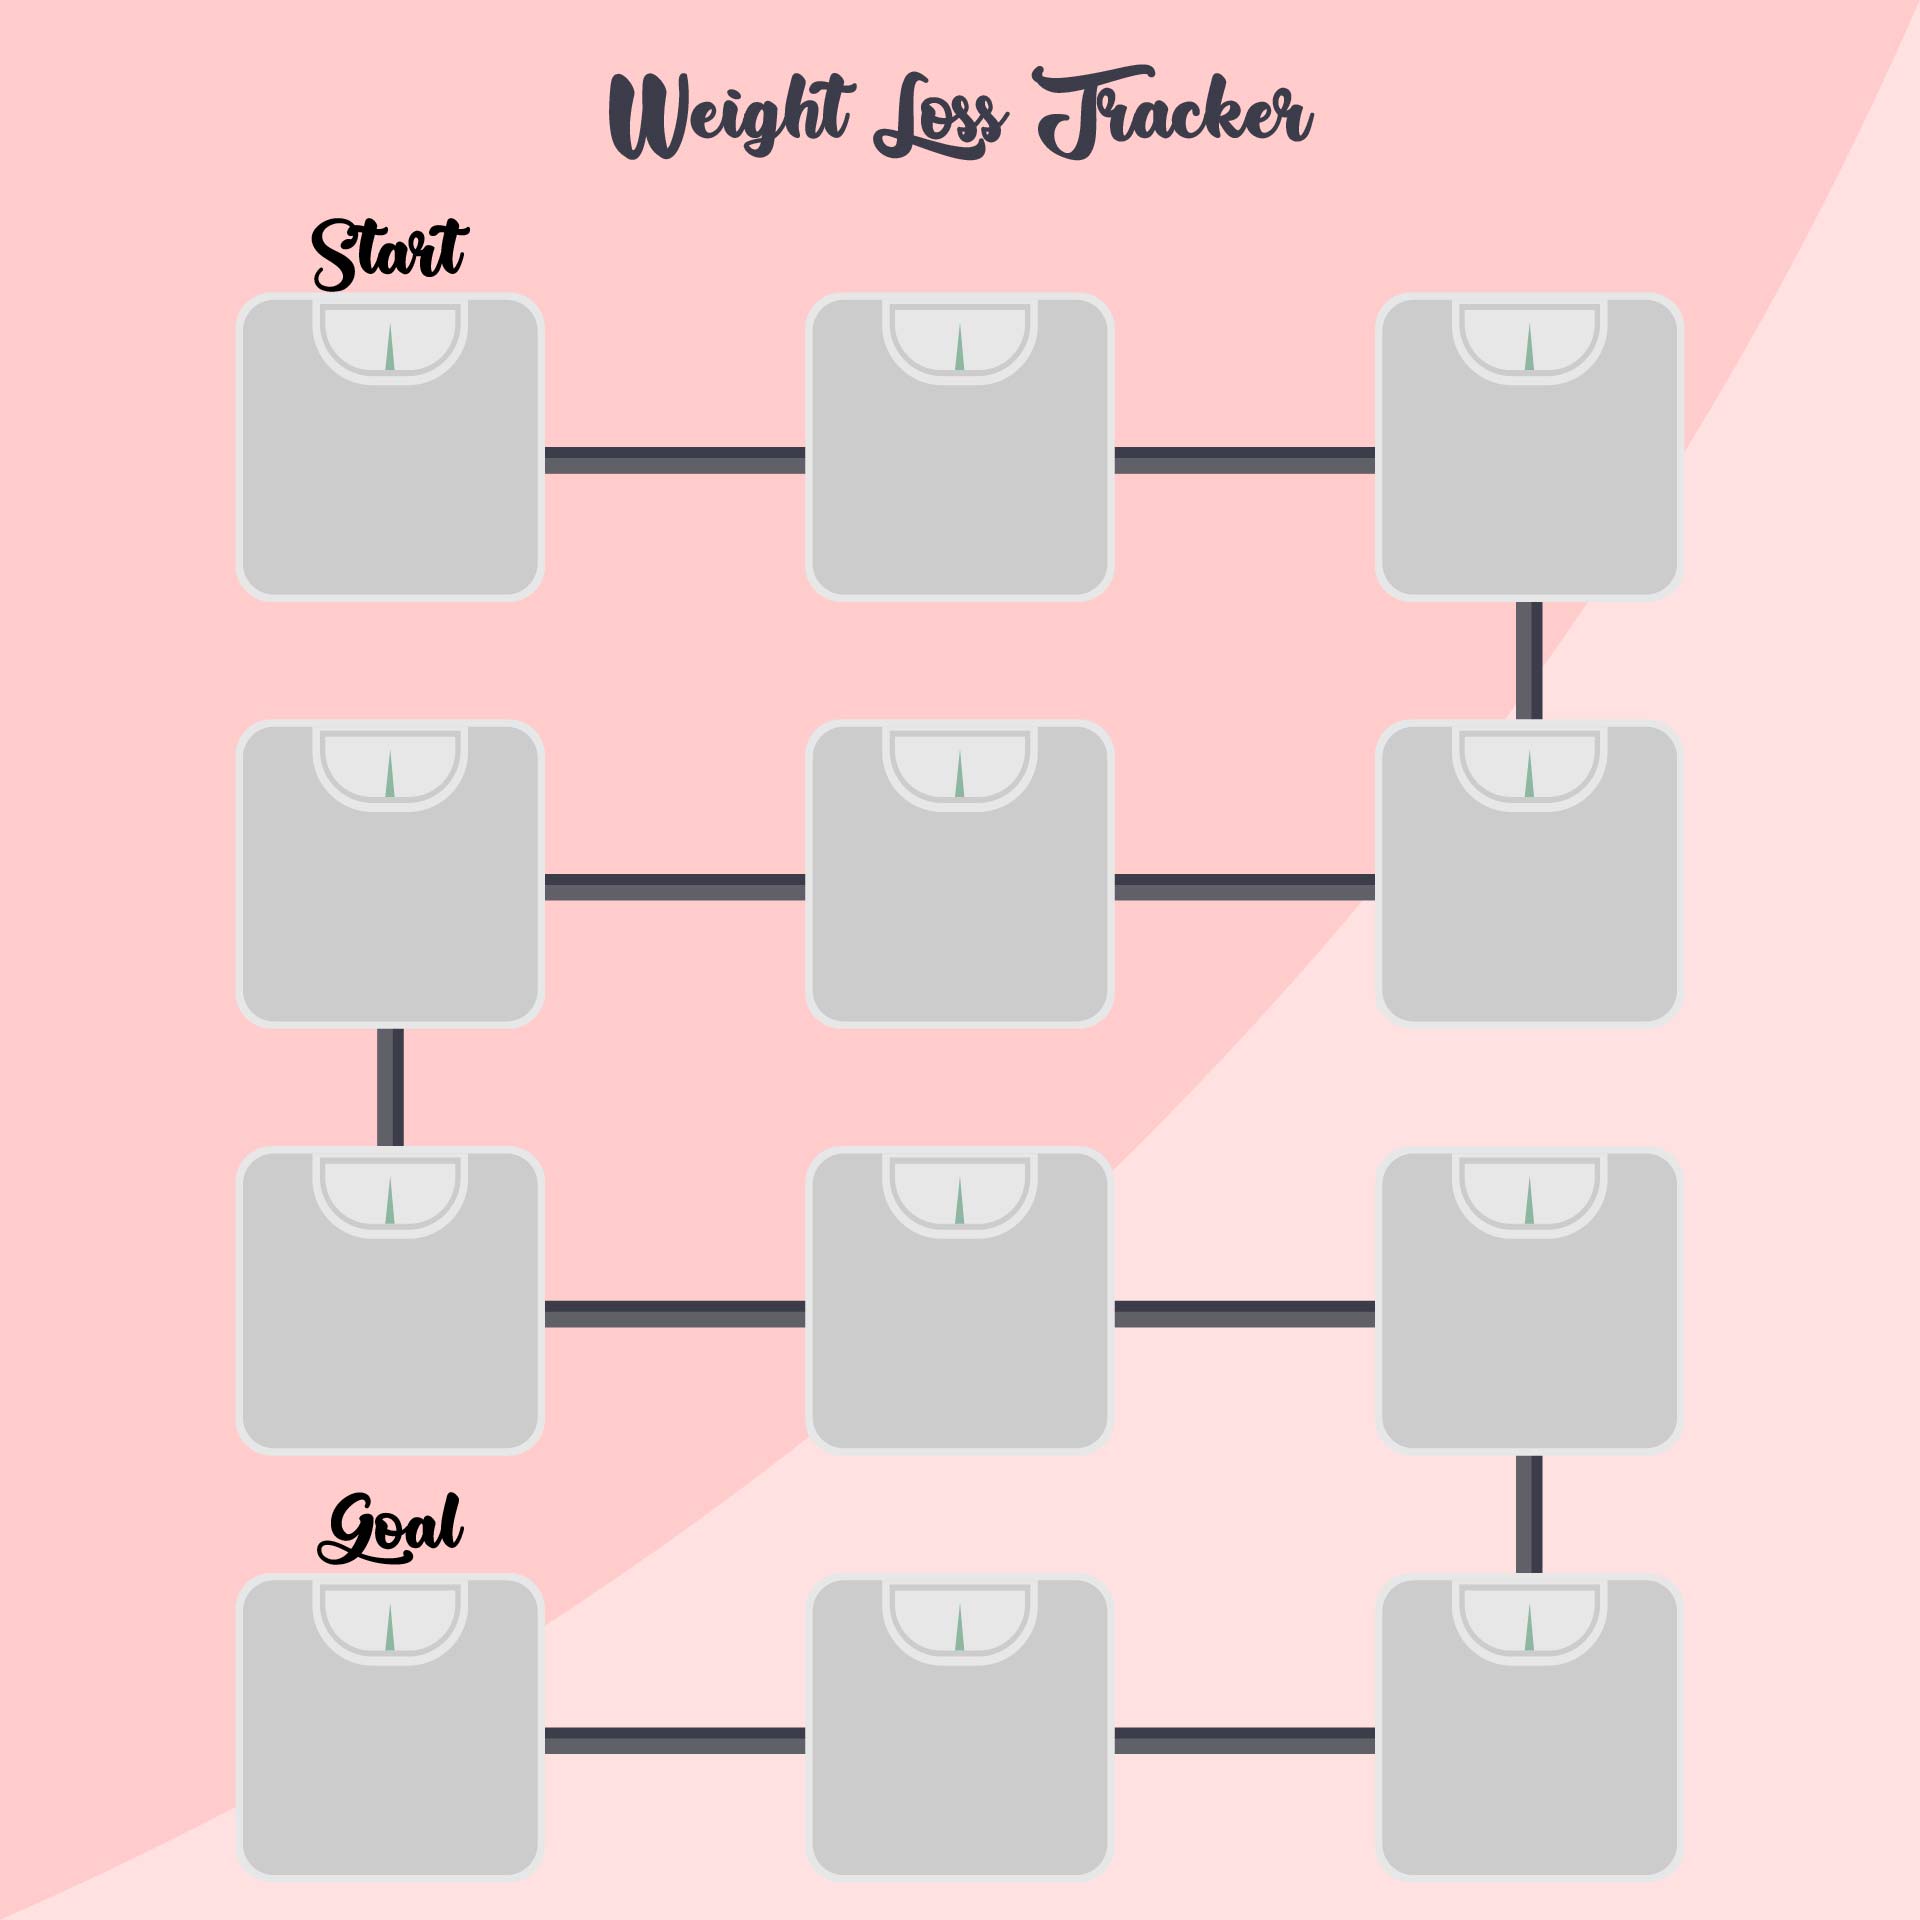 printable weight loss tracker template